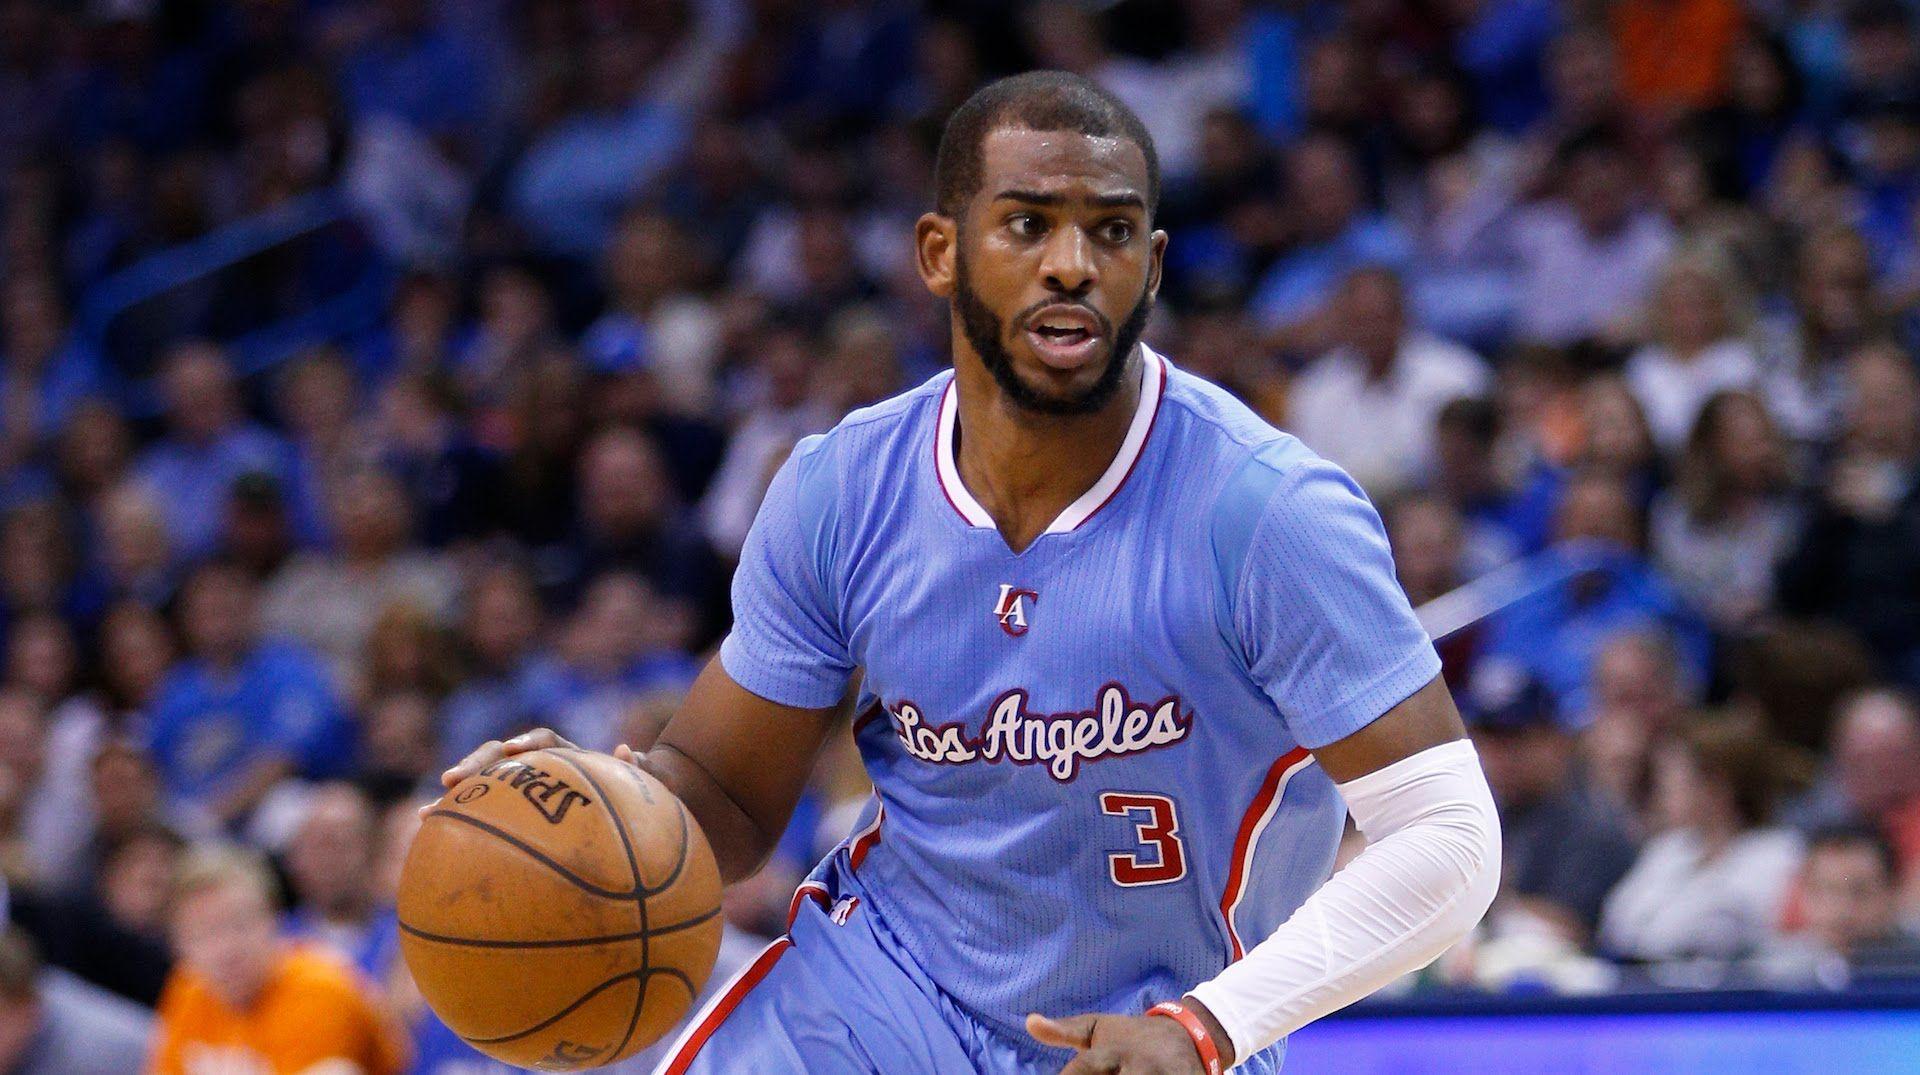 Chris Paul Wallpaper High Resolution and Quality Download